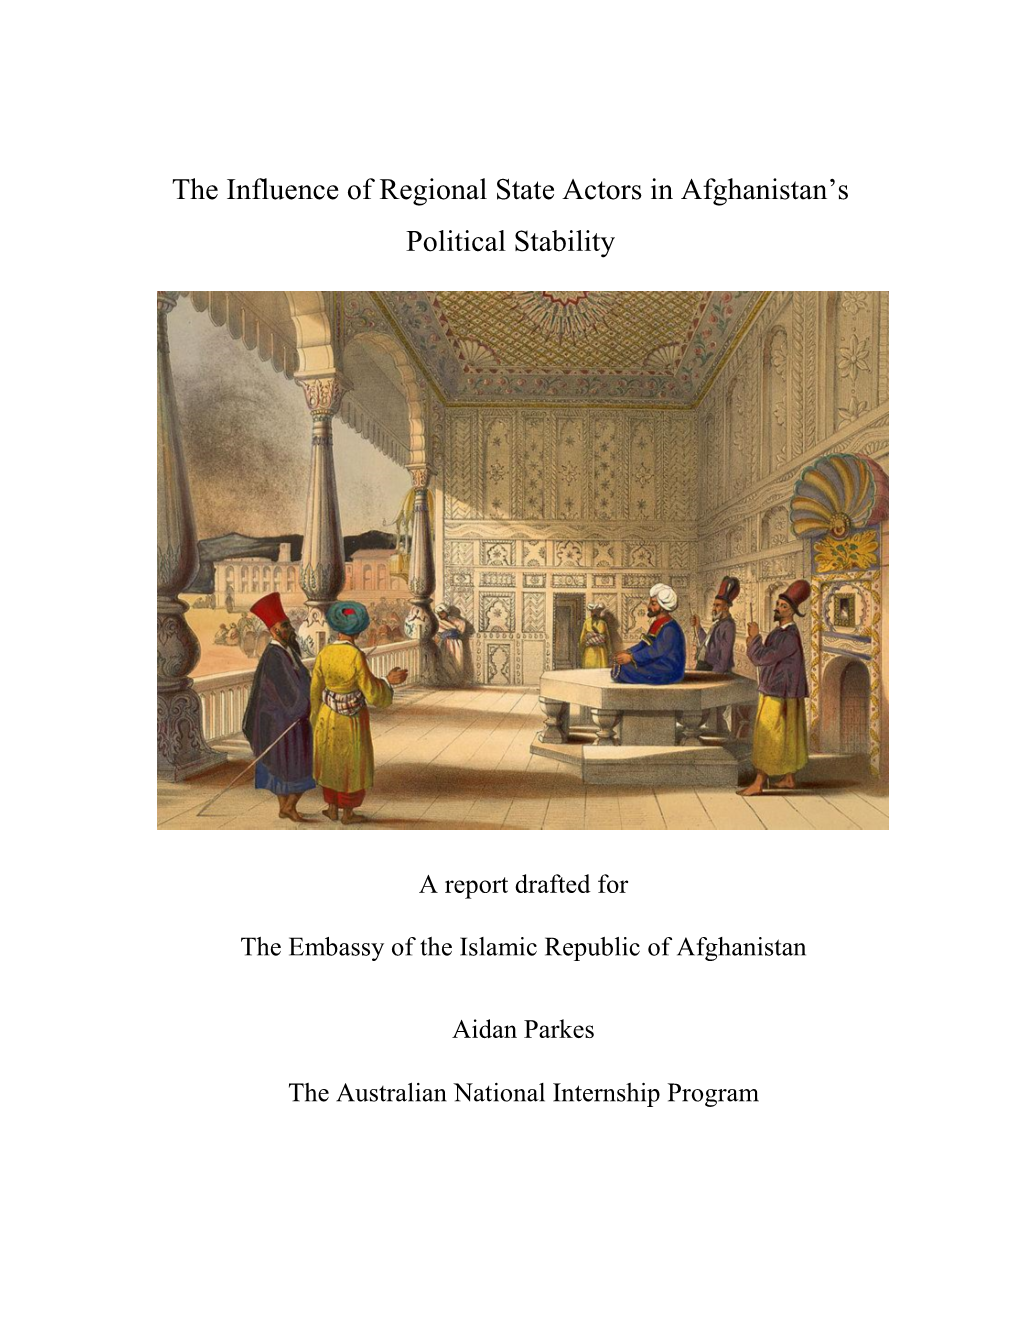 The Influence of Regional State Actors in Afghanistan's Political Stability